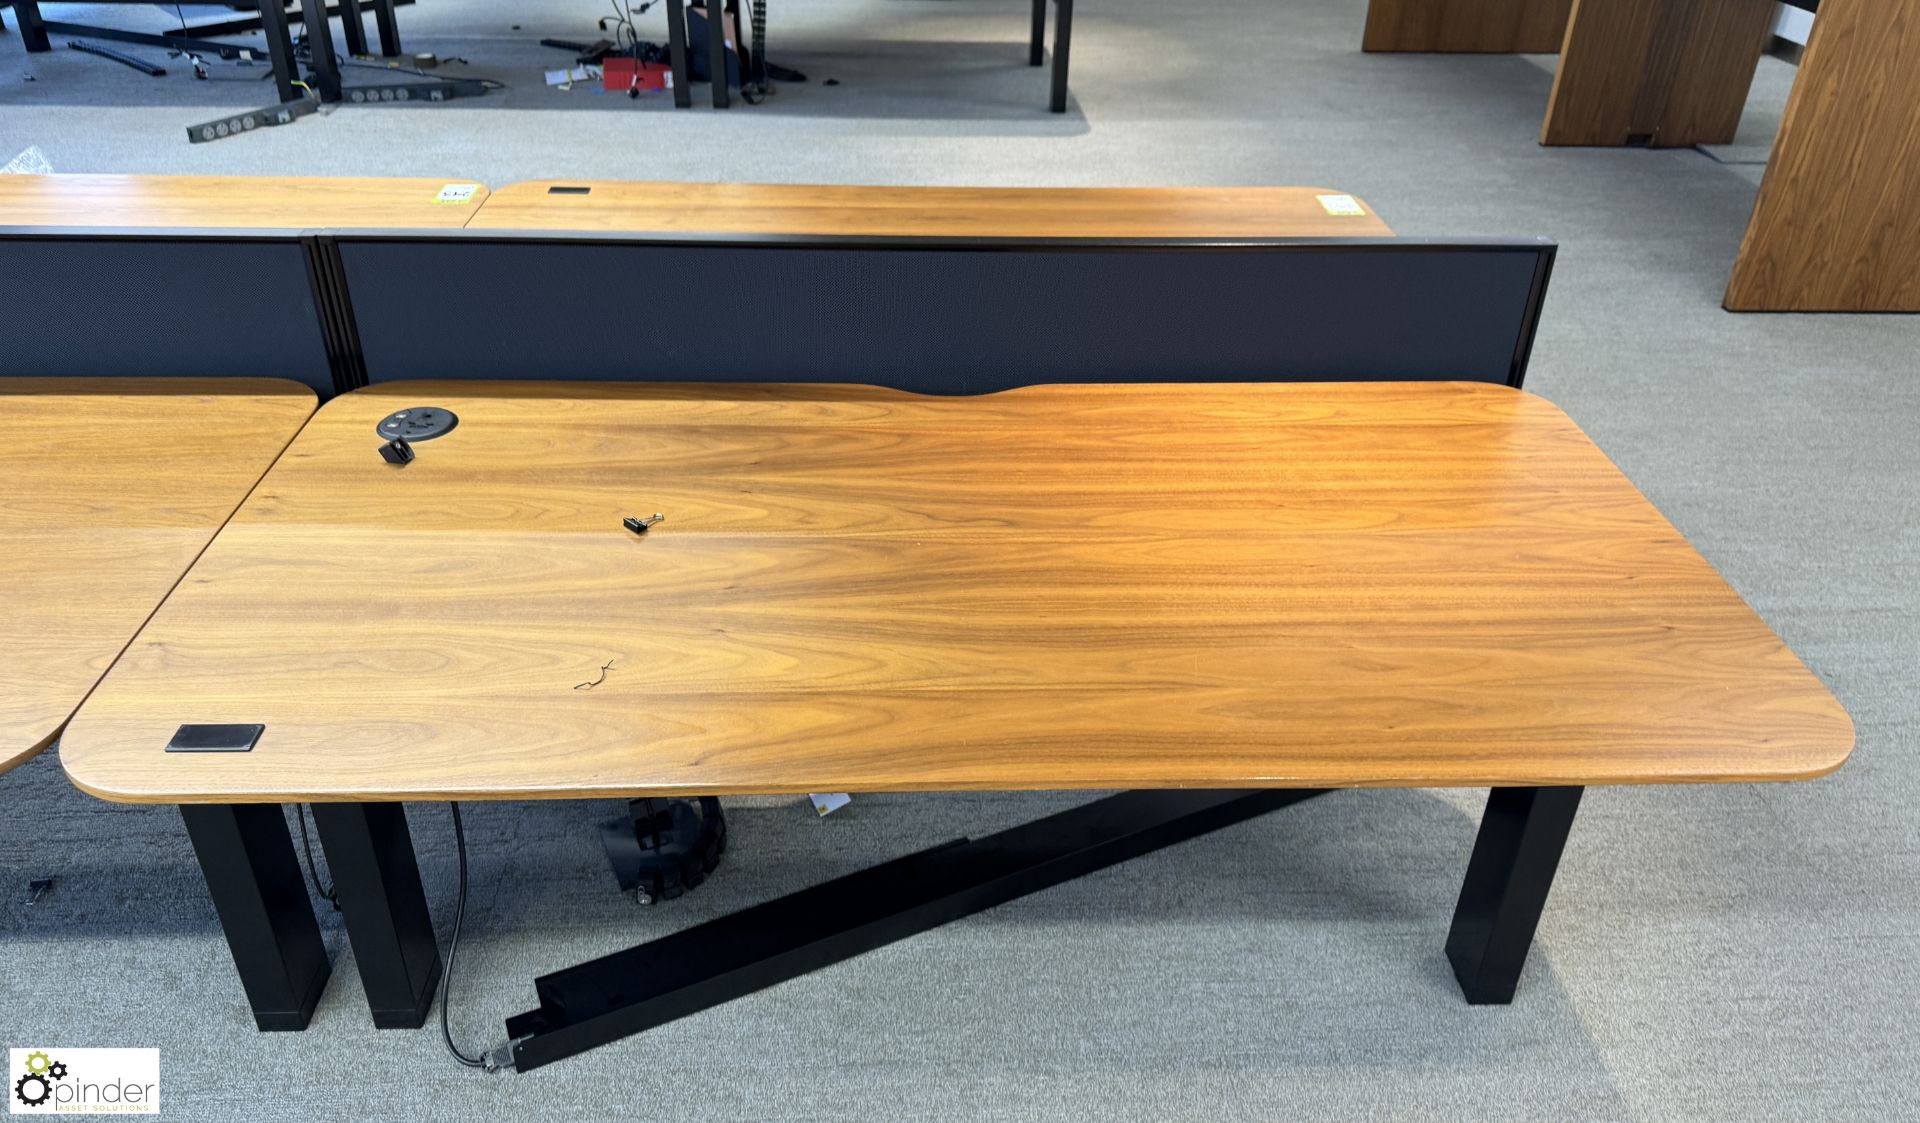 OMT back to back powered rise and fall Desks, 1600mm x 800mm per desk leaf, cherry veneer,with - Image 3 of 5